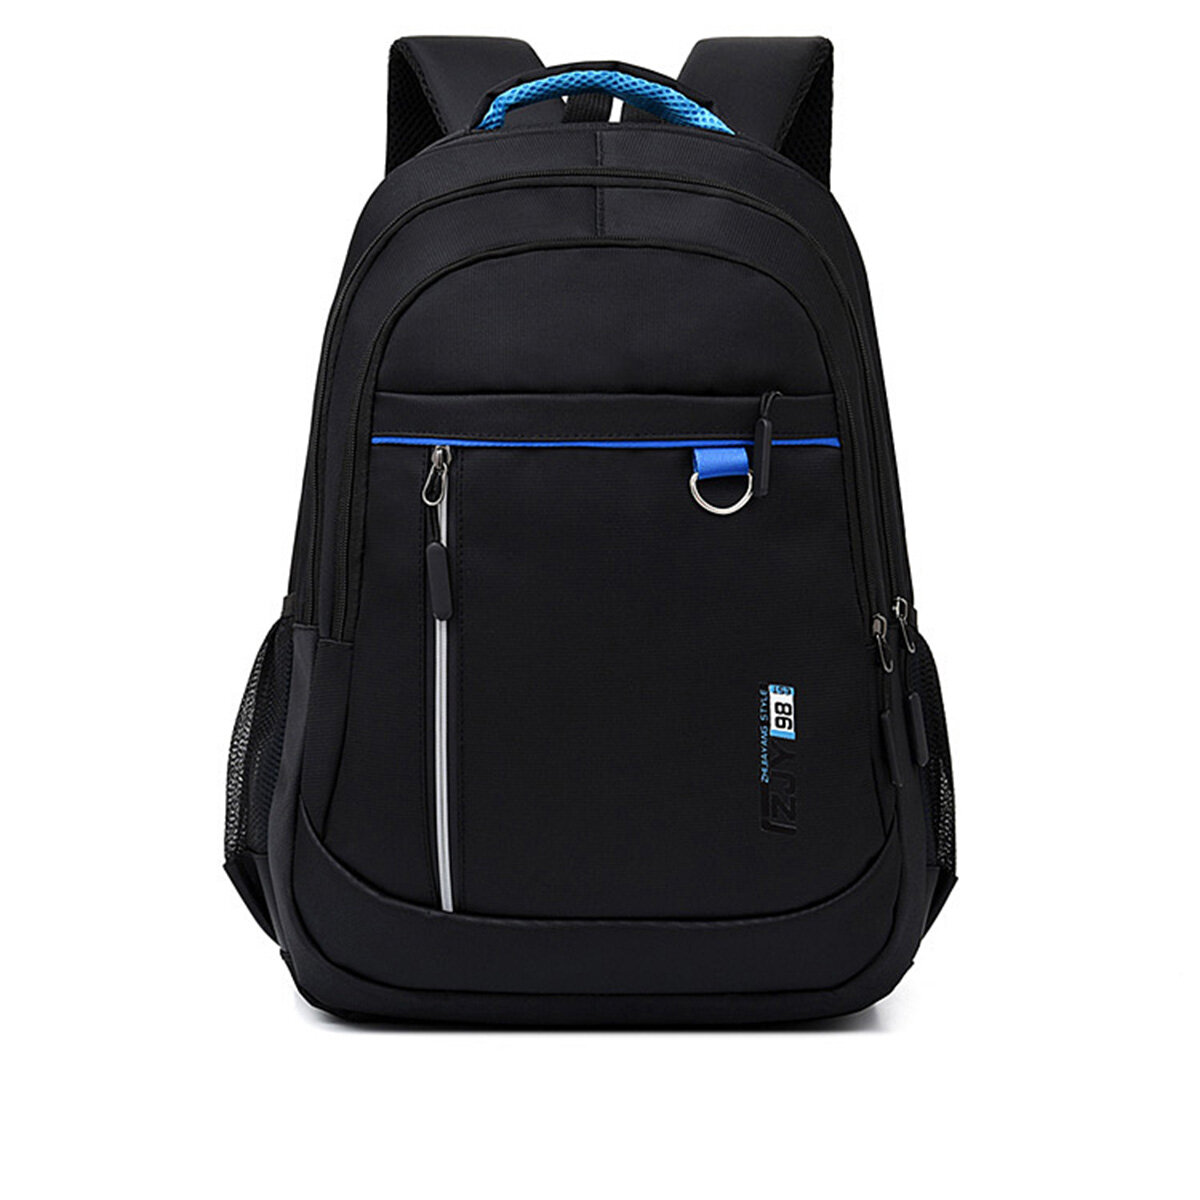 Casual 15.6inch Backpack Anti Theft Waterproof 15inch Laptop Bag Camping Travel Rucksack